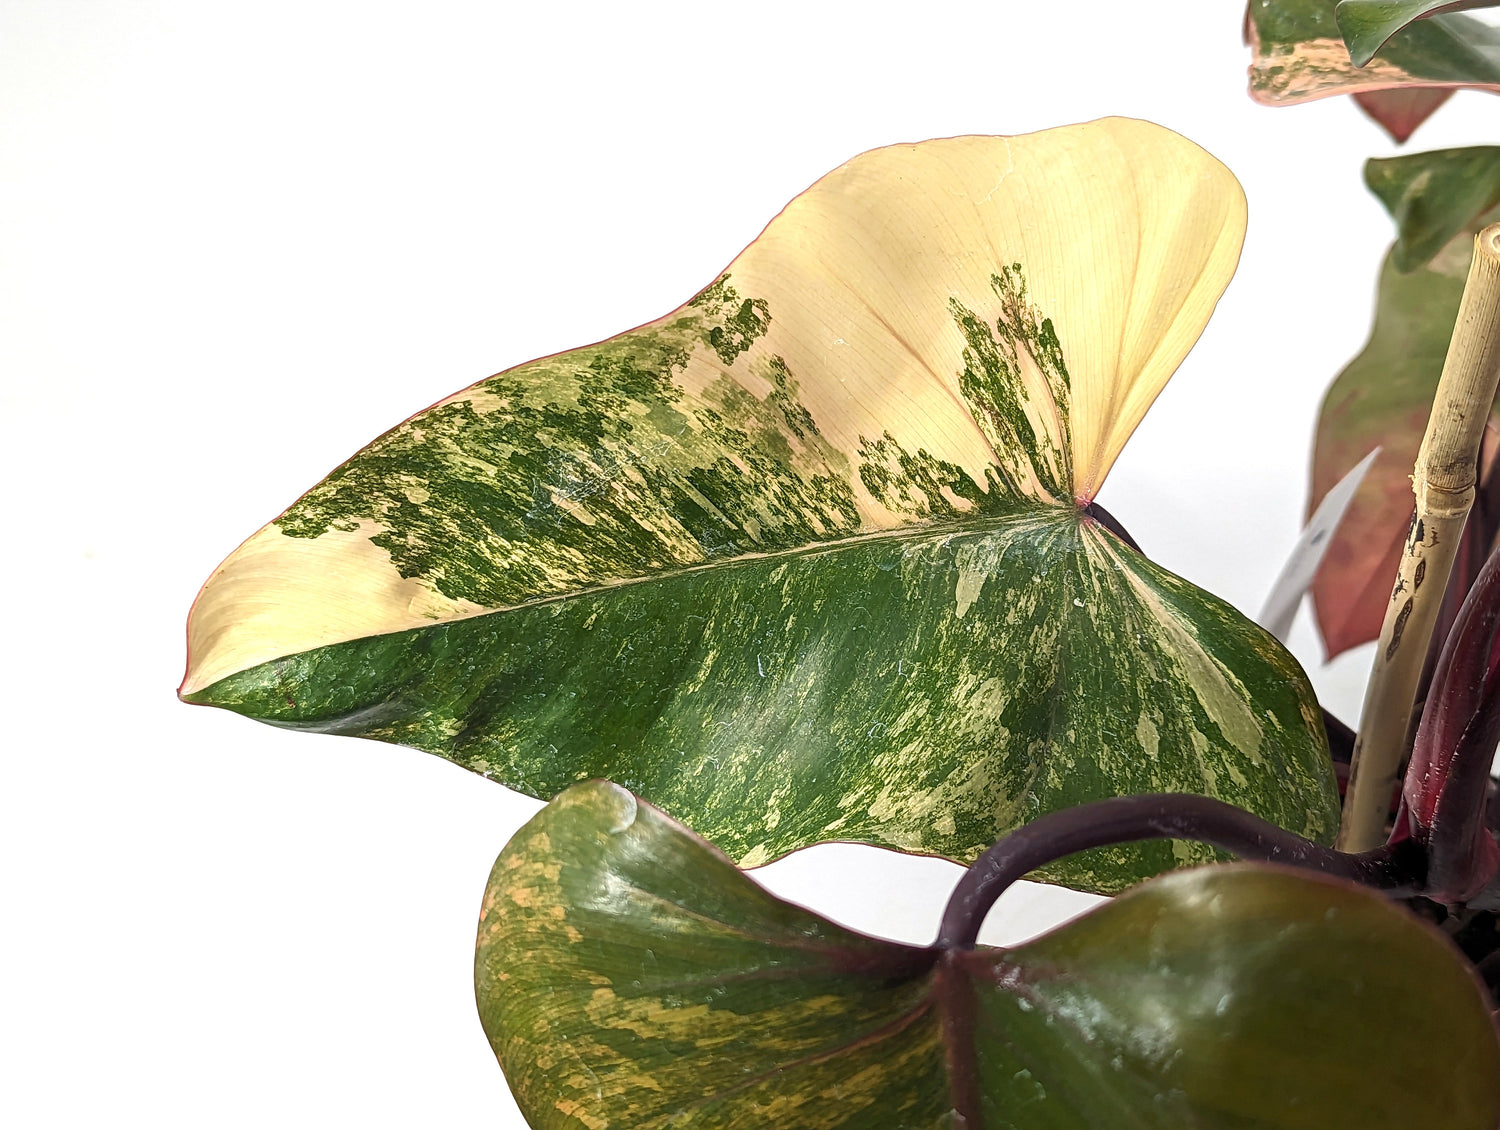 Philodendron Strawberry Shake High Color Pink Leaves 6 inch Pot - Exact Plant Pictured One Of a Kind Amazing Color